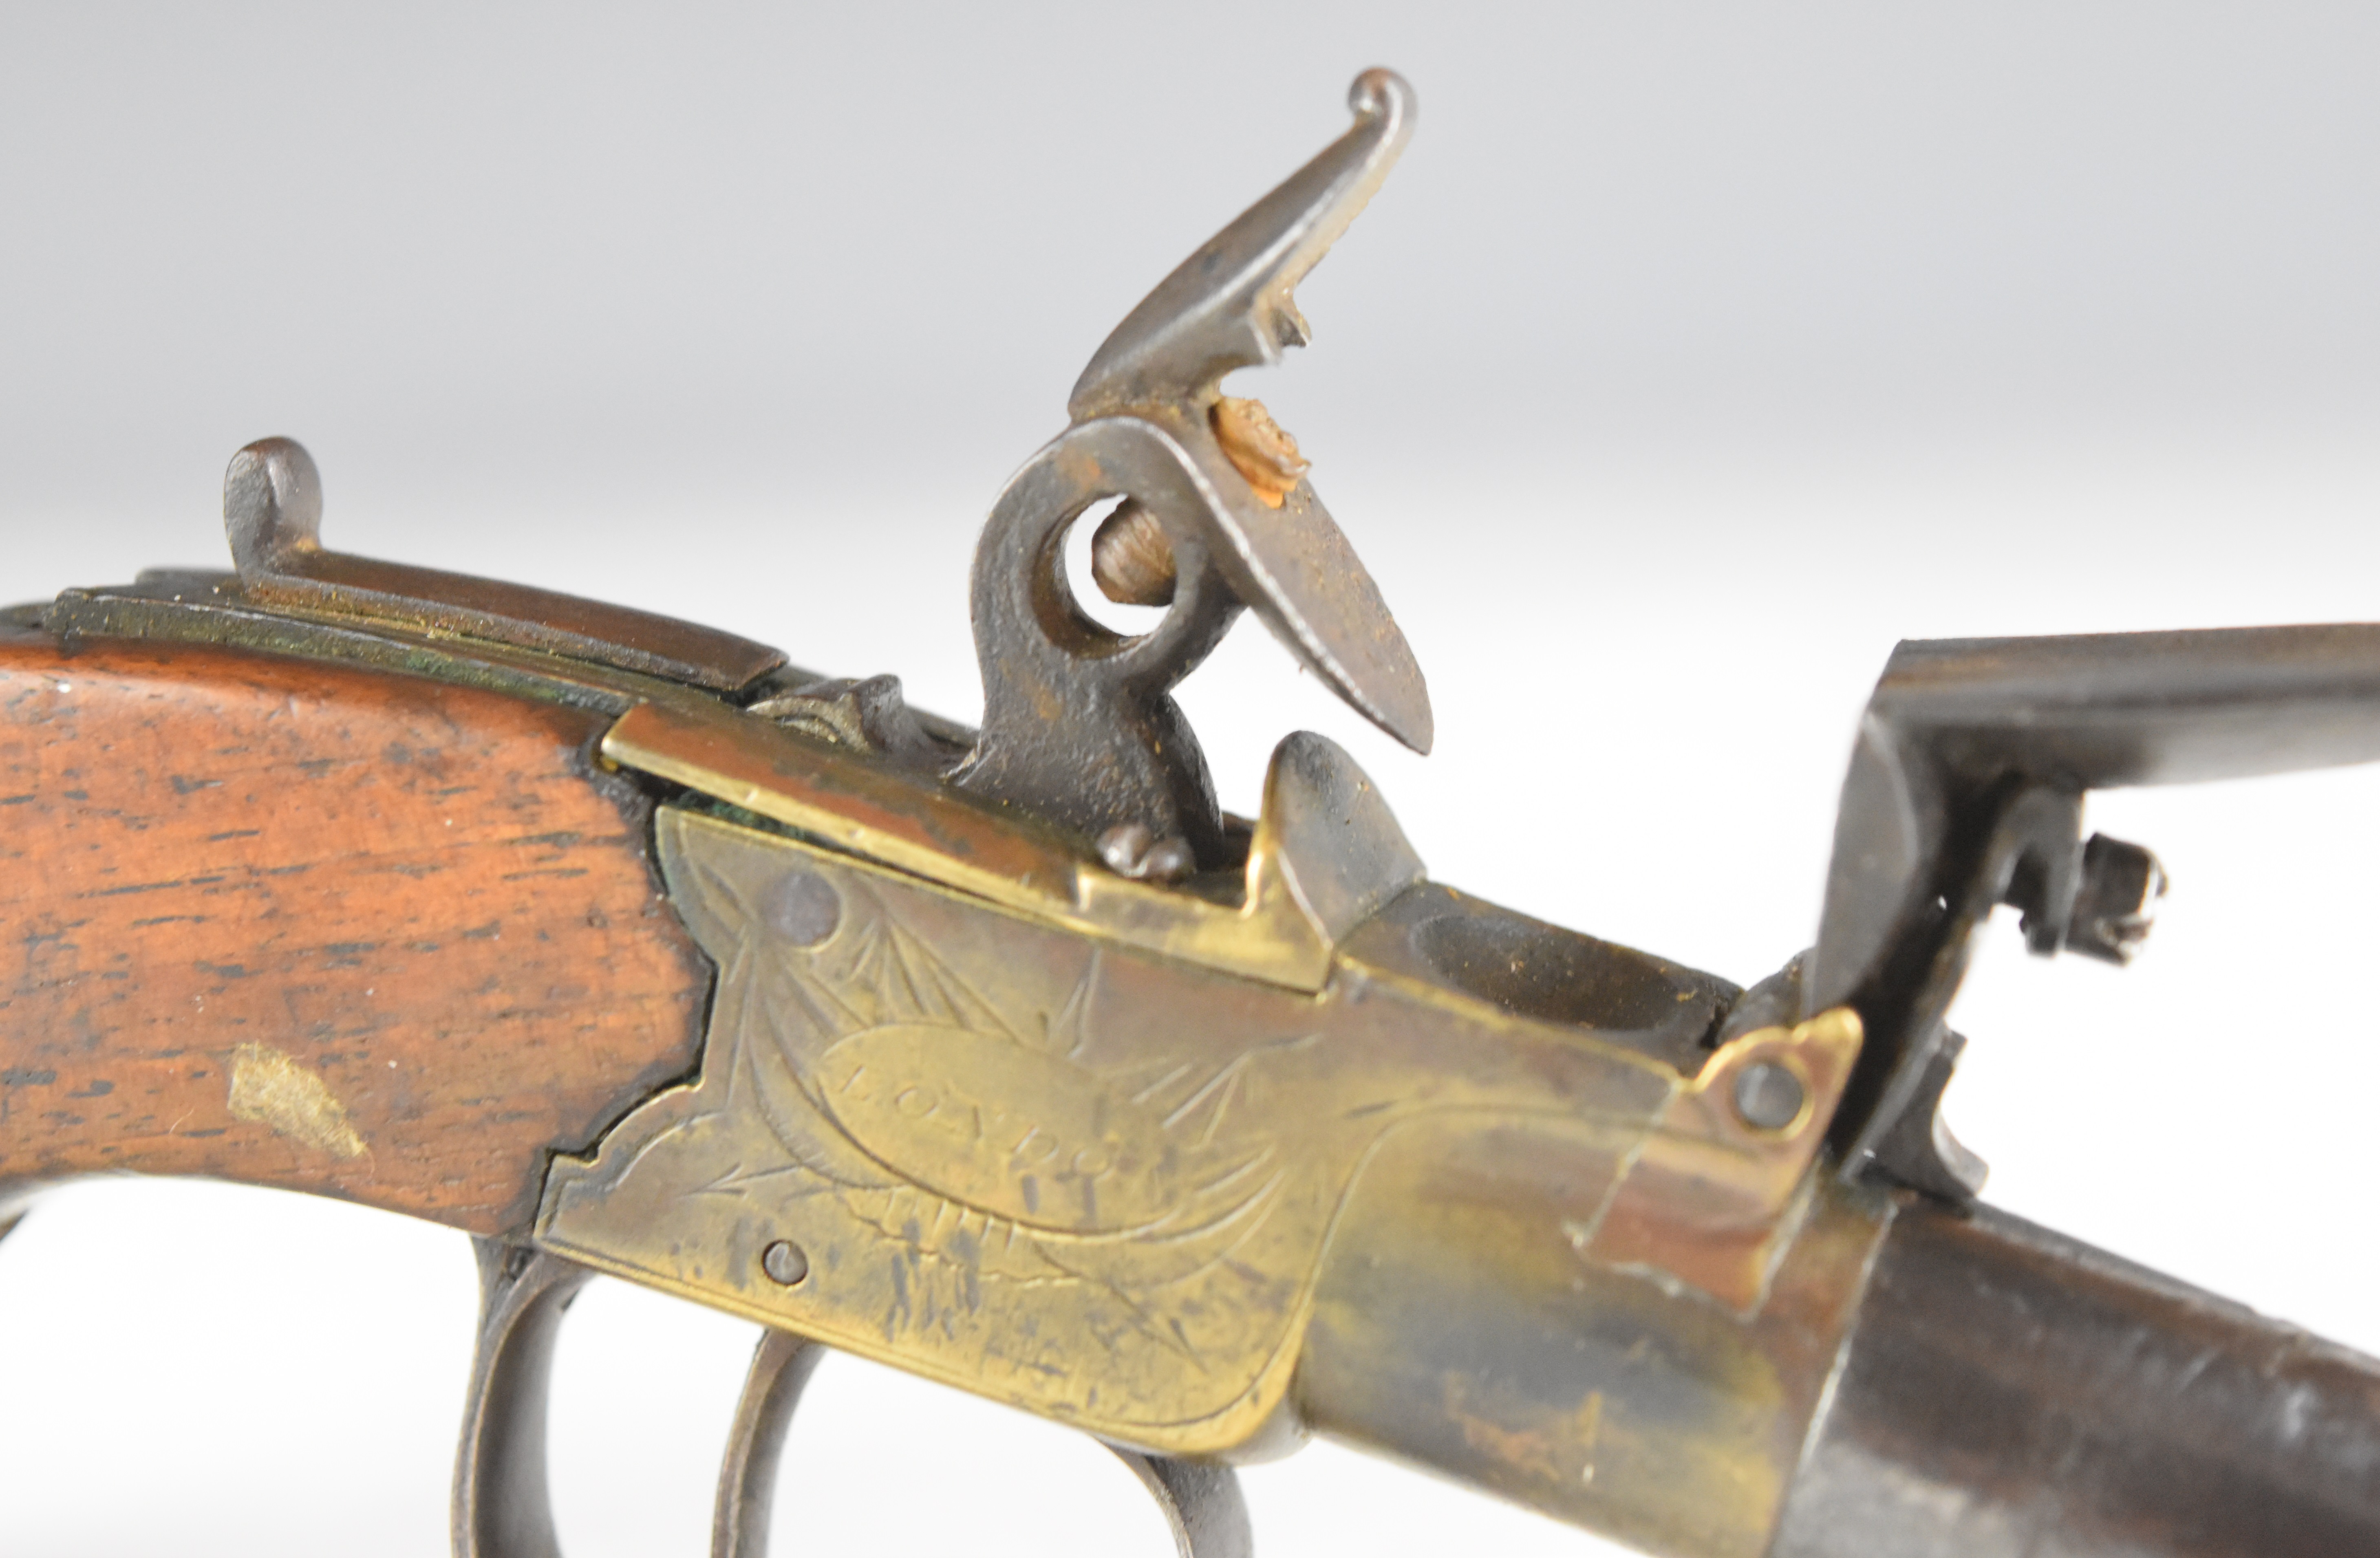 Rea of London flintlock pocket pistol with named and engraved brass lock, thumb slide safety, shaped - Image 10 of 11